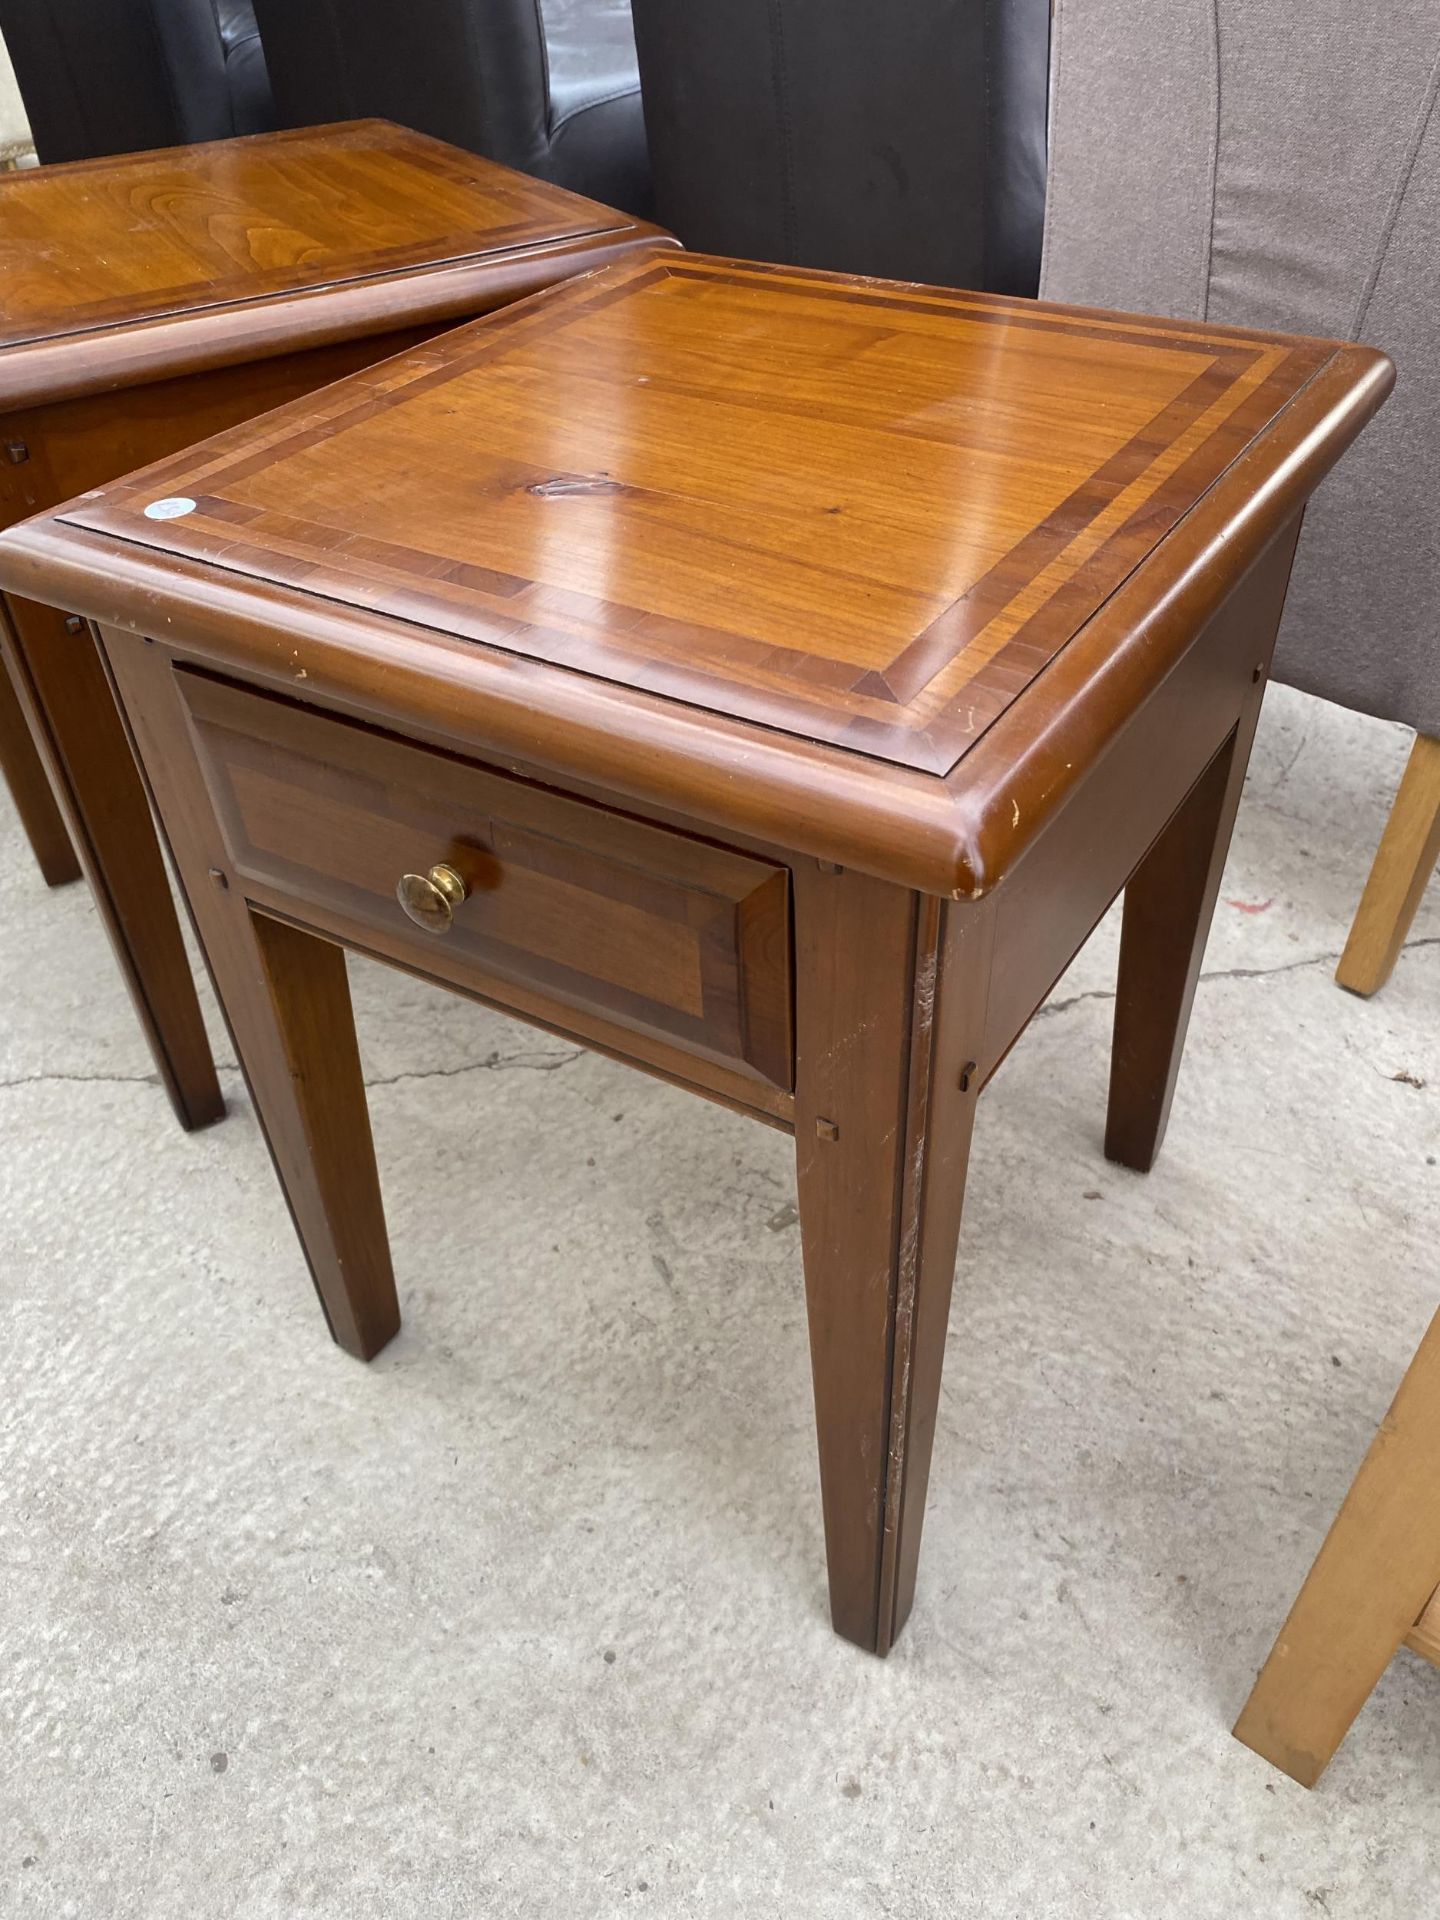 A PAIR OF MODERN WALNUT AND CROSSBANDED LAMP TABLES WITH SINGLE DRAWER 18 X 16.5" - Image 4 of 4